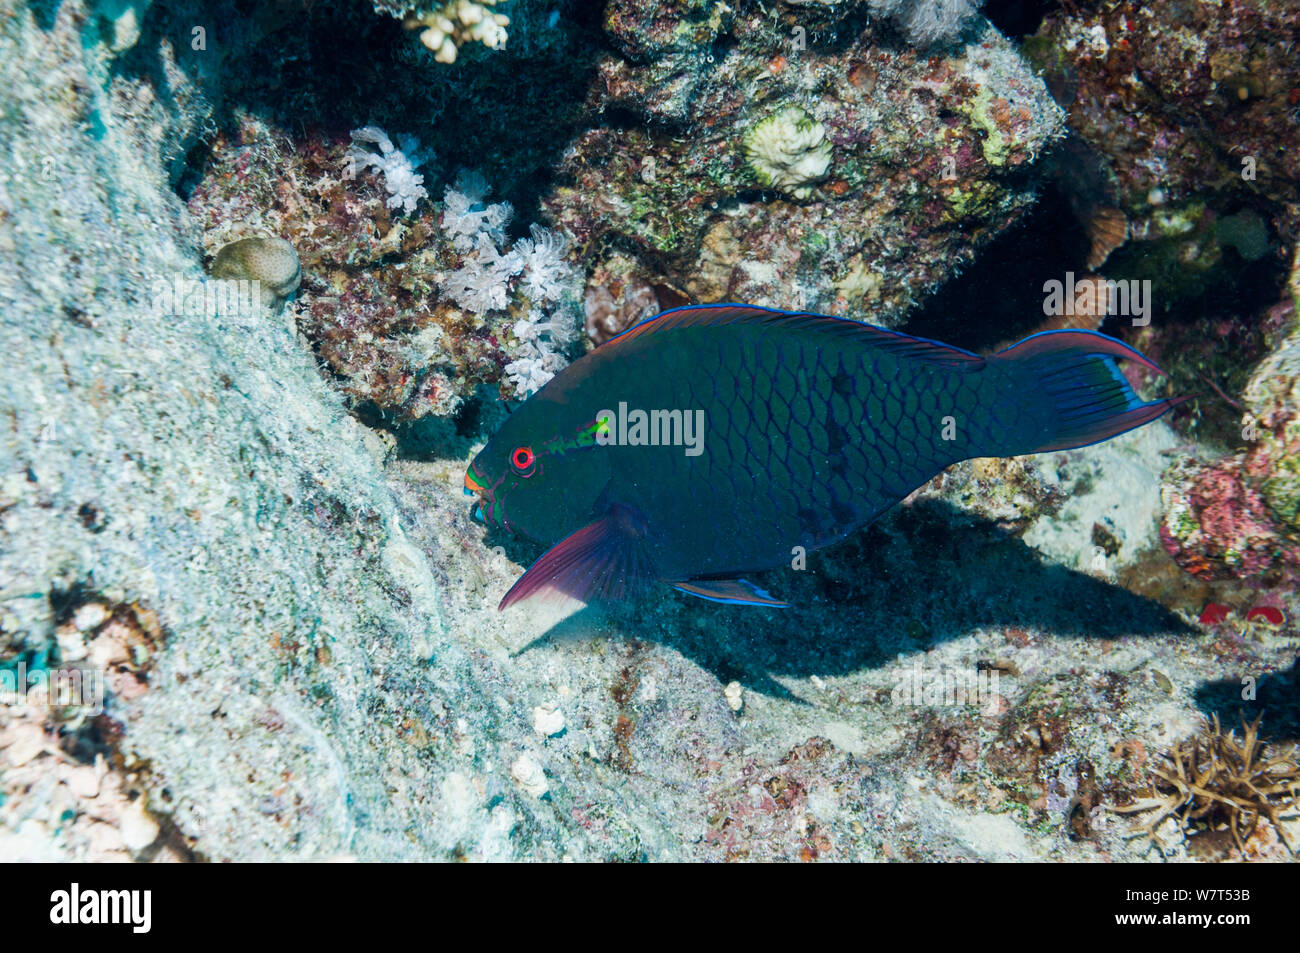 Swarthy / Dusky parrotfish (Scarus niger) grazing. Egypt, Red Sea. Stock Photo